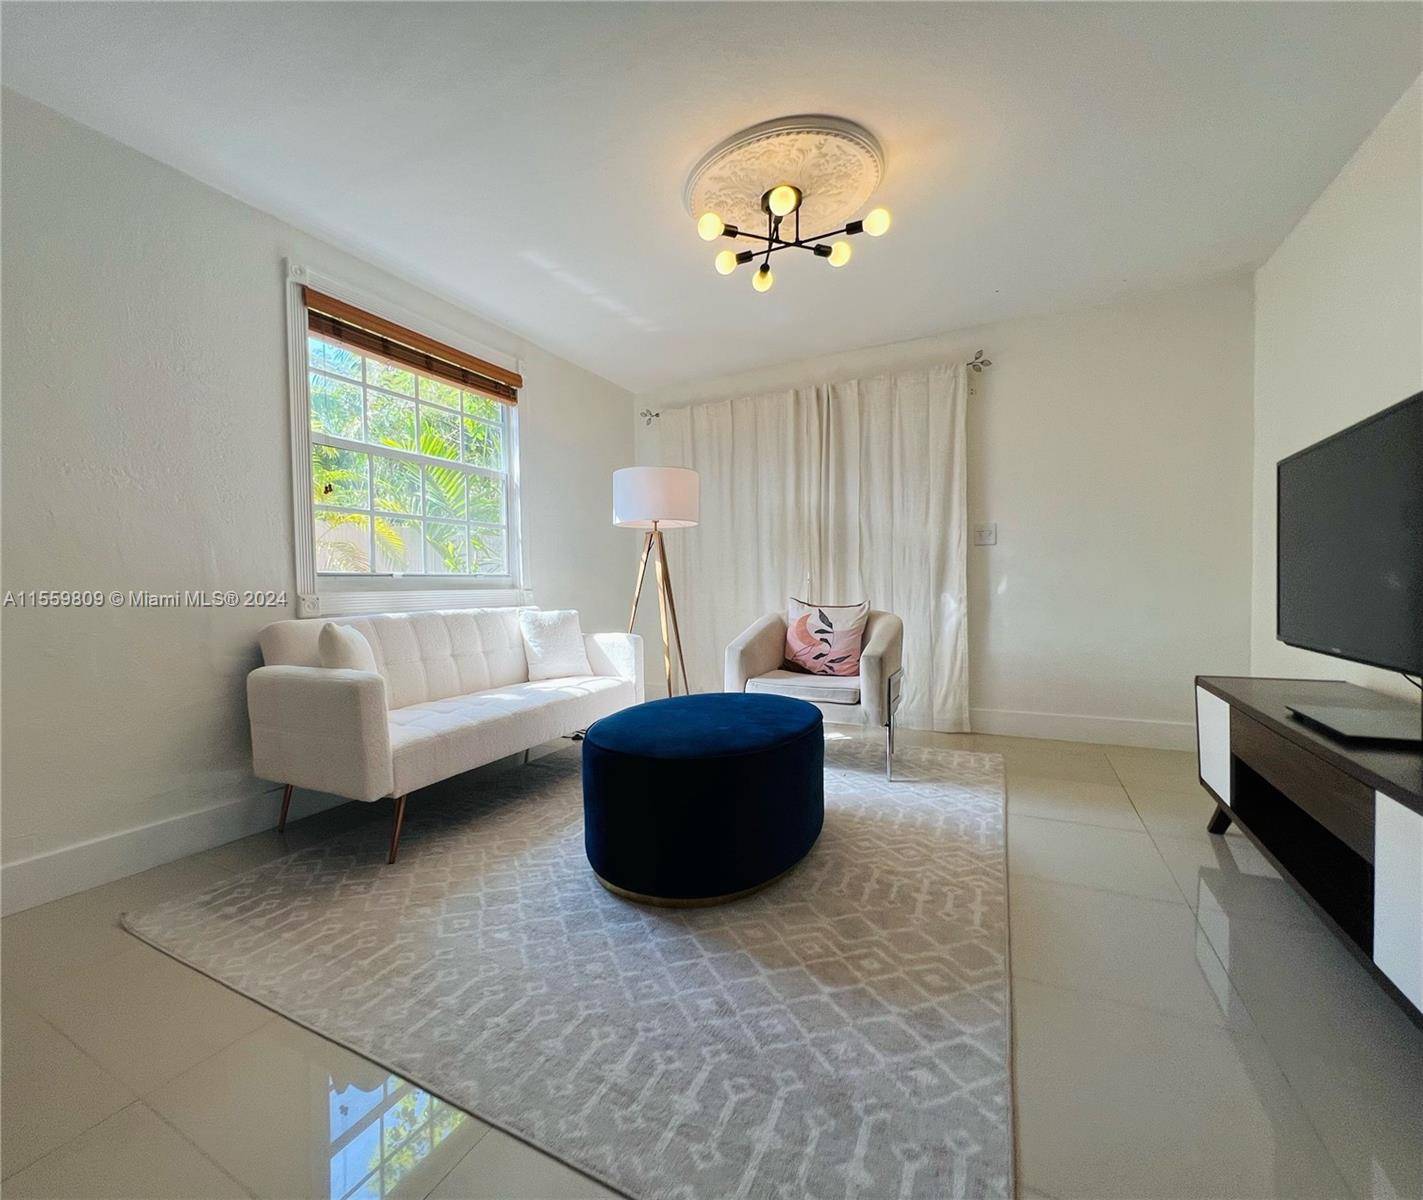 Beautiful fully furnished 2BD 1BA house for rent in the heart of Miami.